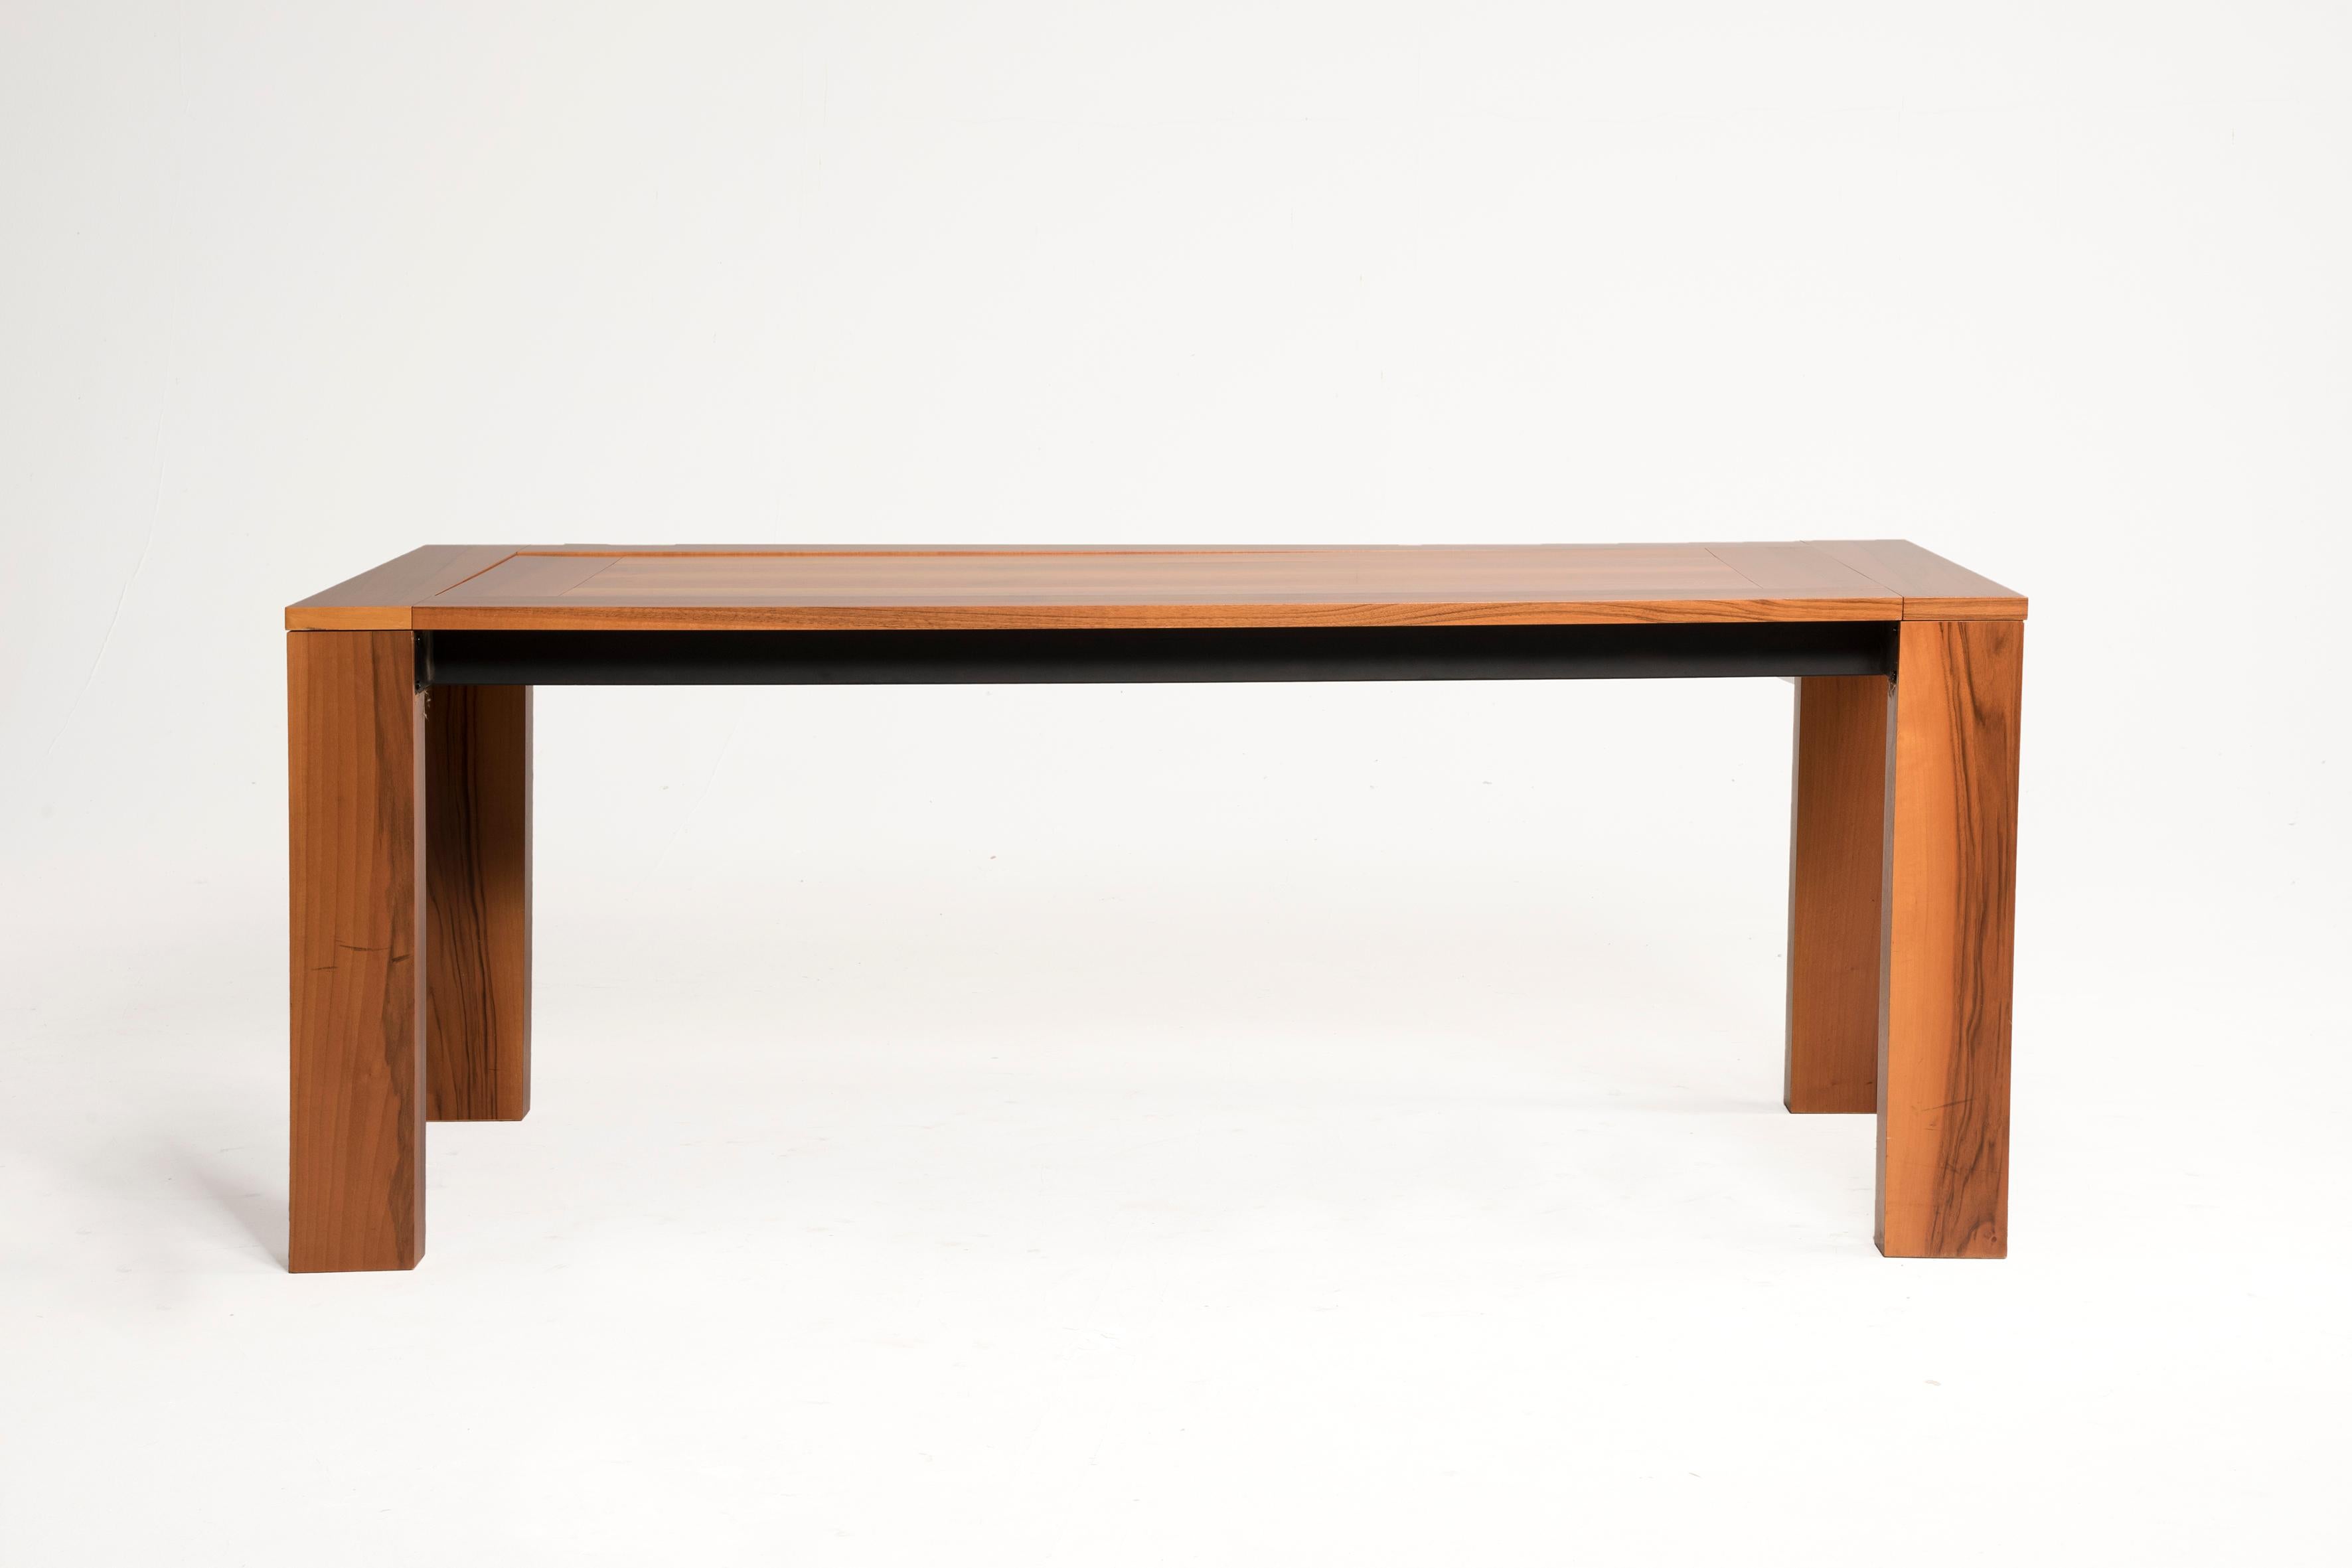 Walnut wood table, Acerbis production, 1970s. Size: 190 x 90 x H 74.5 cm, 74.8 inches x 35.4 inches. x H 29.33 inches. Perfect both as dining table in the kitchen and meeting room or desk table. Excellent conditions. Conservative restoration. A